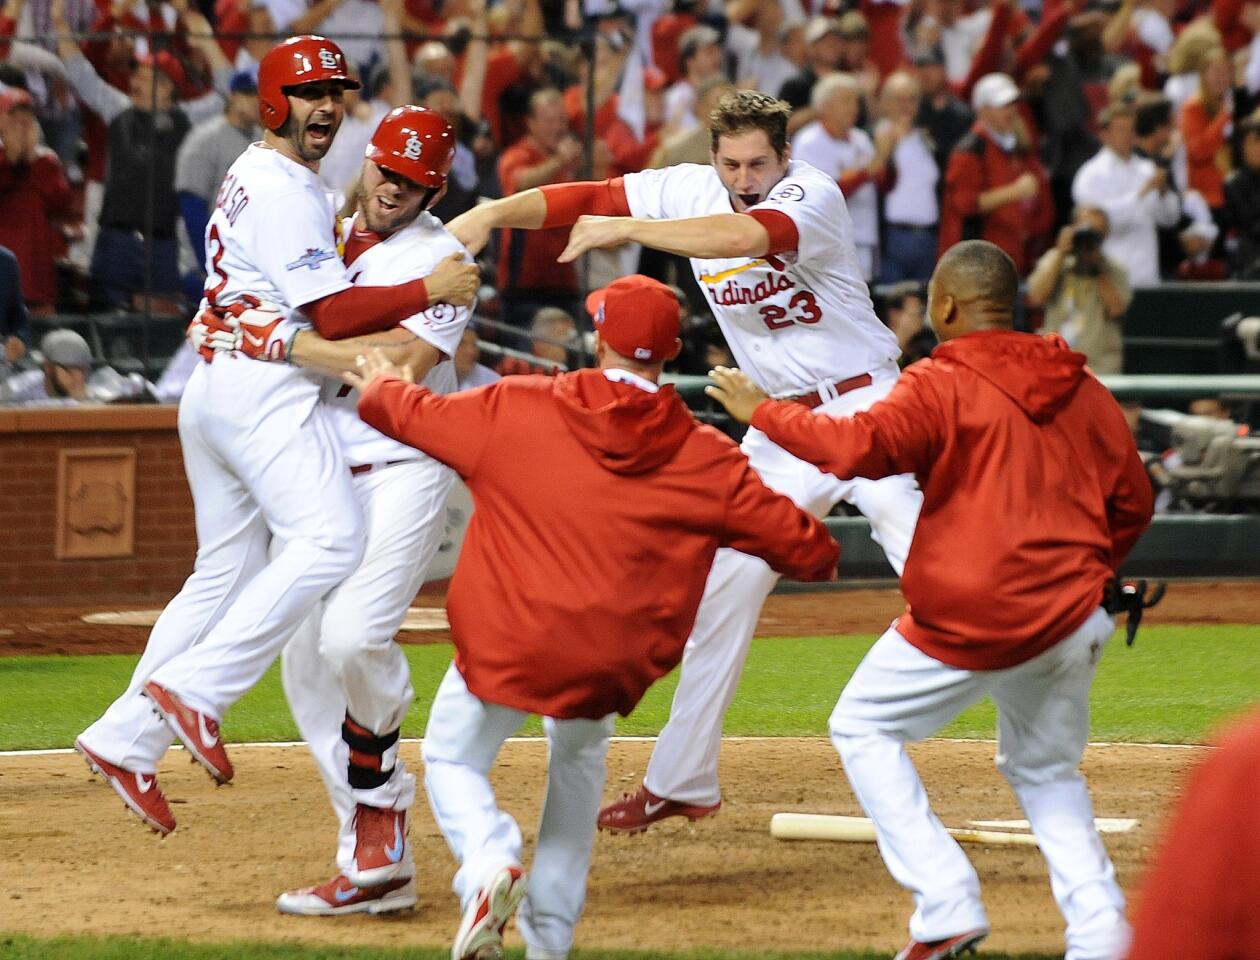 Cardinals teammates swarm Daniel Descalso after he scored the winning run against the Dodgers on a single by Carlos Beltran in the 13th inning of Game 1 on Friday night in St. Louis.